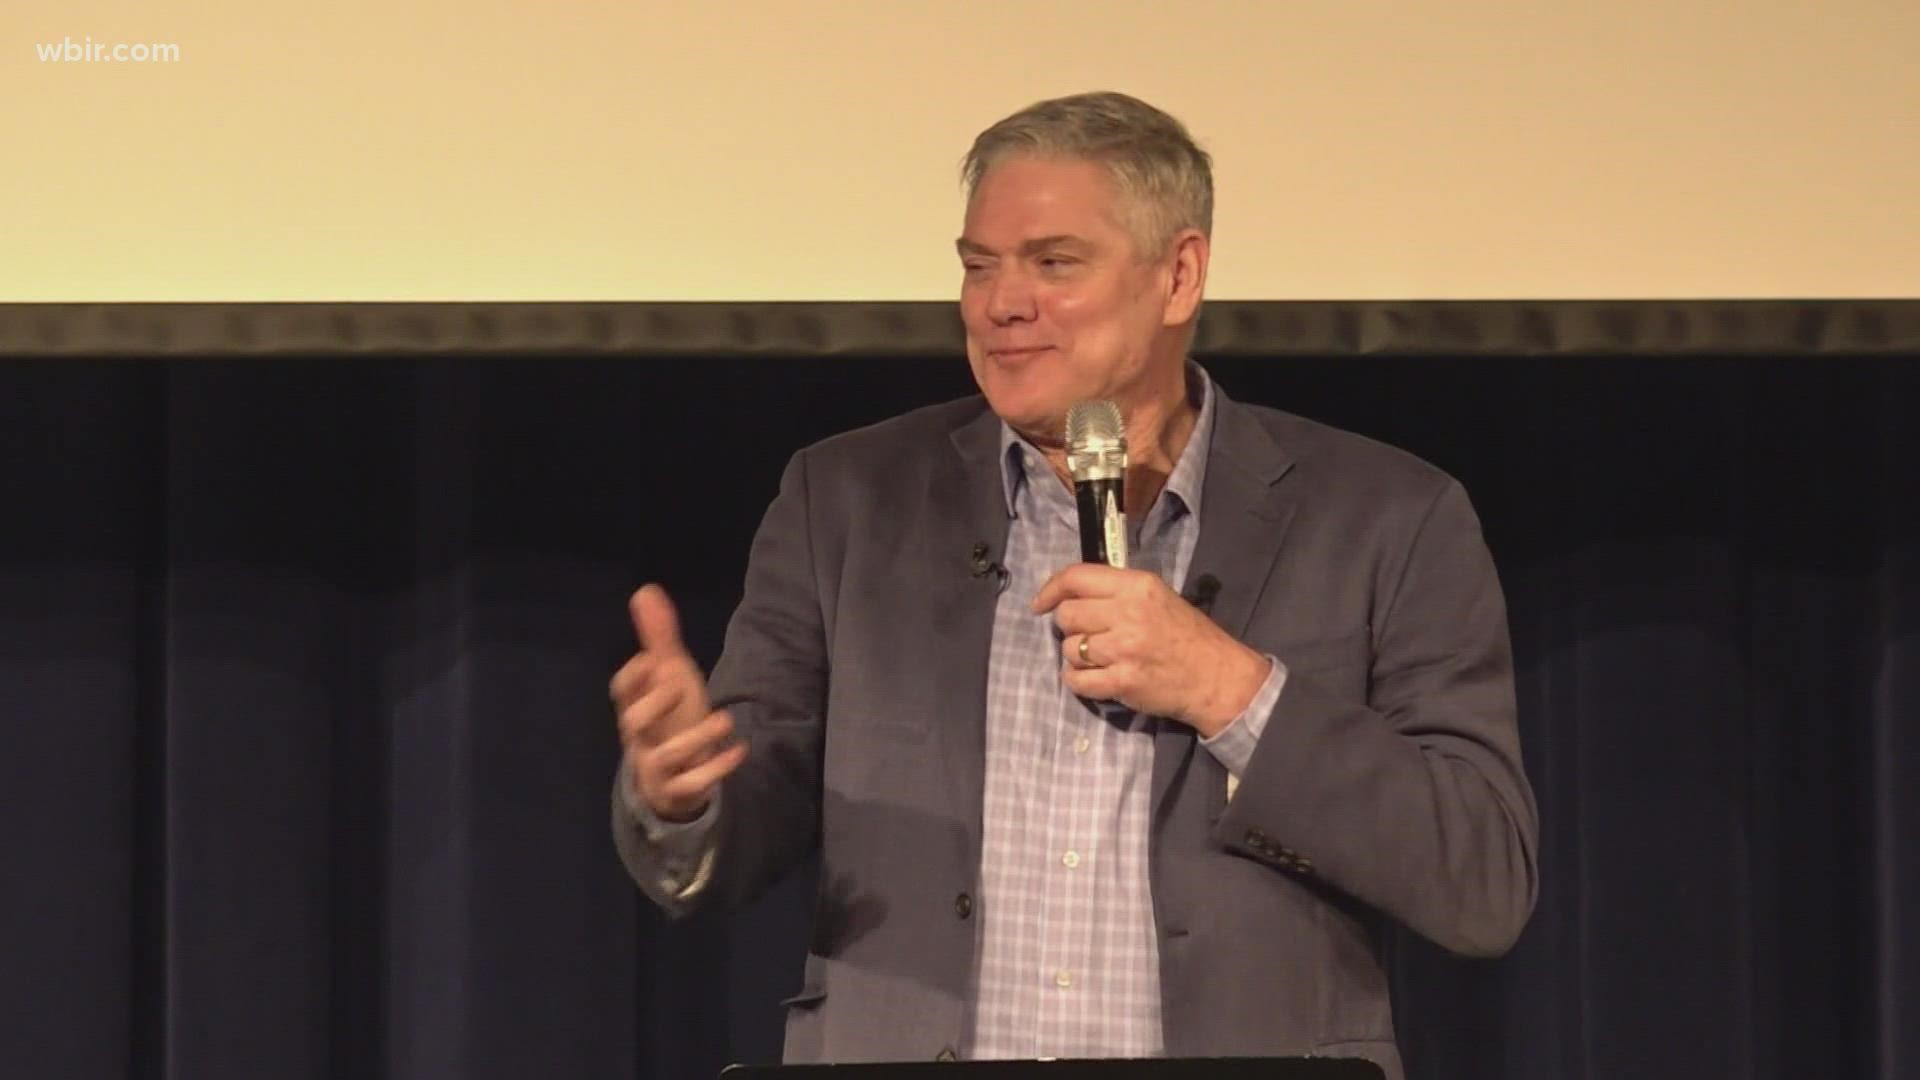 Dale Murphy speaks to attendees at a Hardin Valley baseball fundraising event.